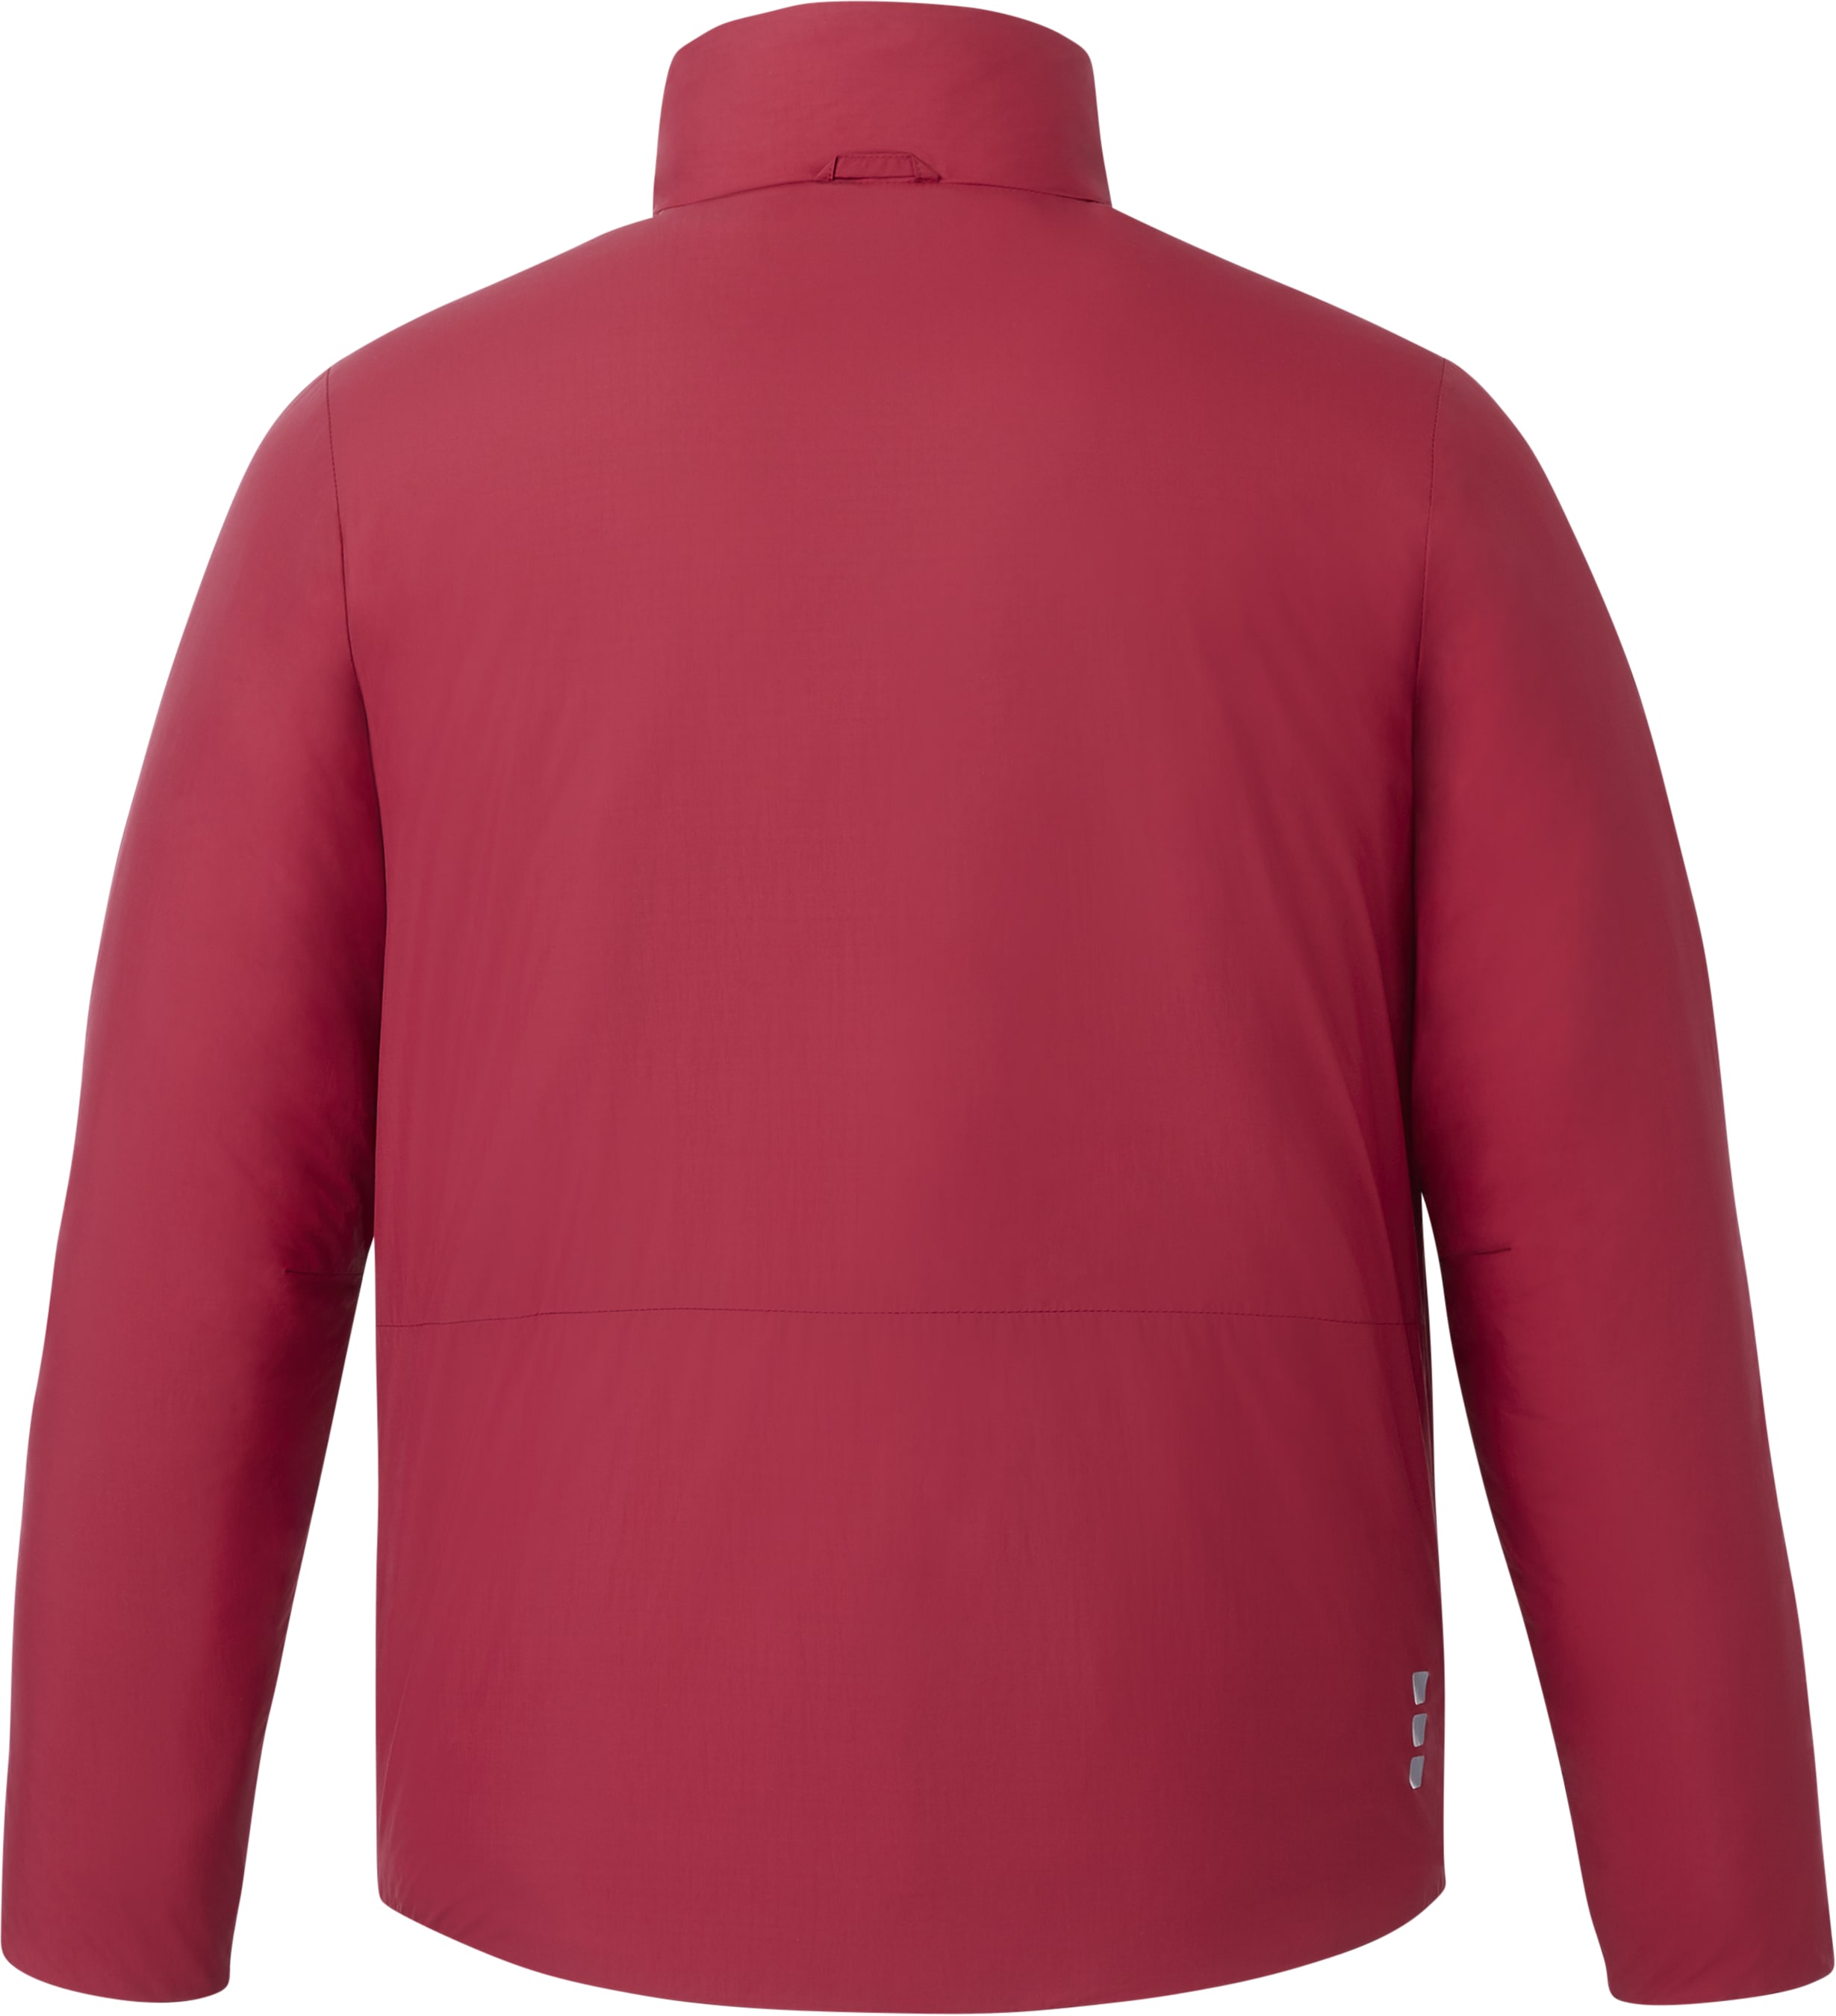 Men's KYES Eco Packable Insulated Jacket